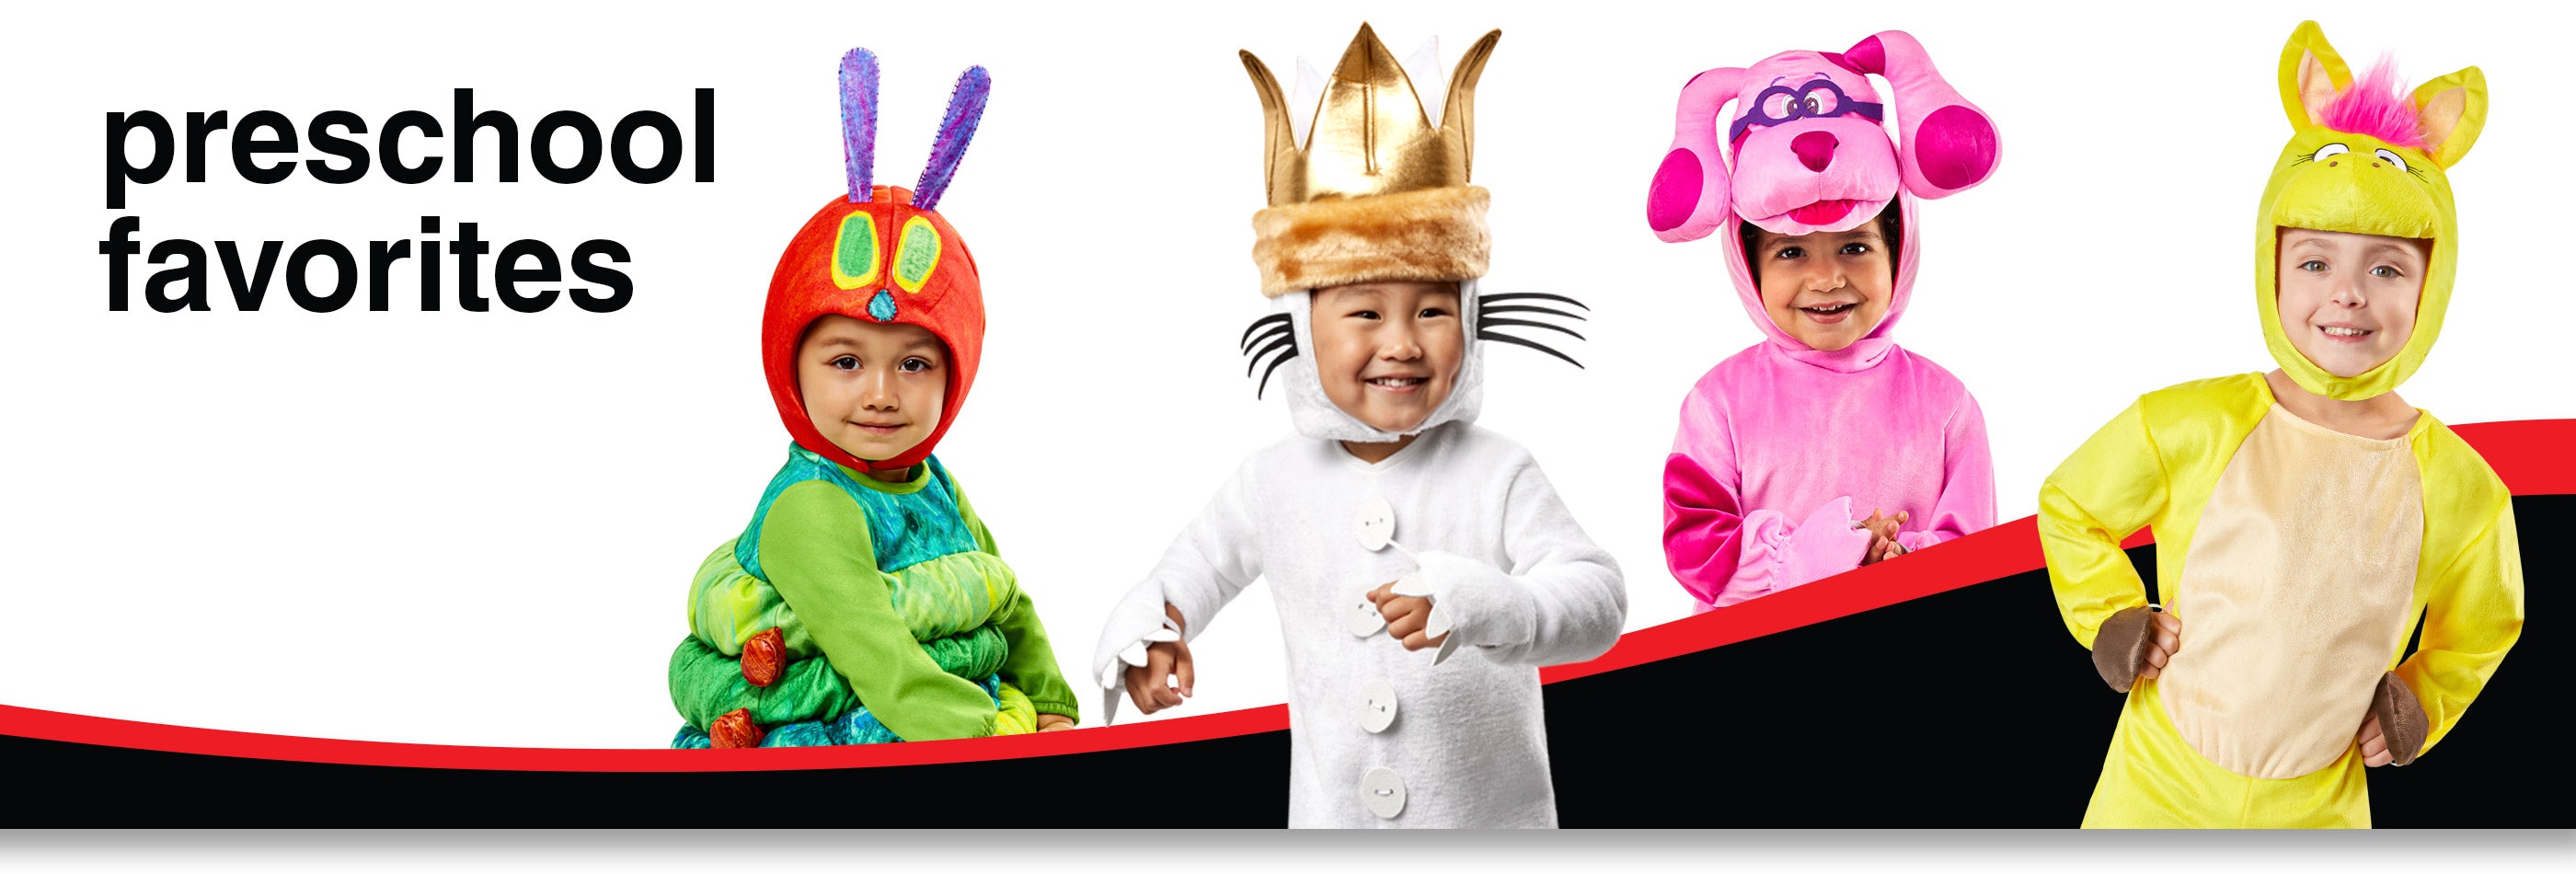 Rubie's Unisex-Adult's Opus Collection Comfy Wear Lion Costume, As As  Shown, L-XL : : Clothing, Shoes & Accessories